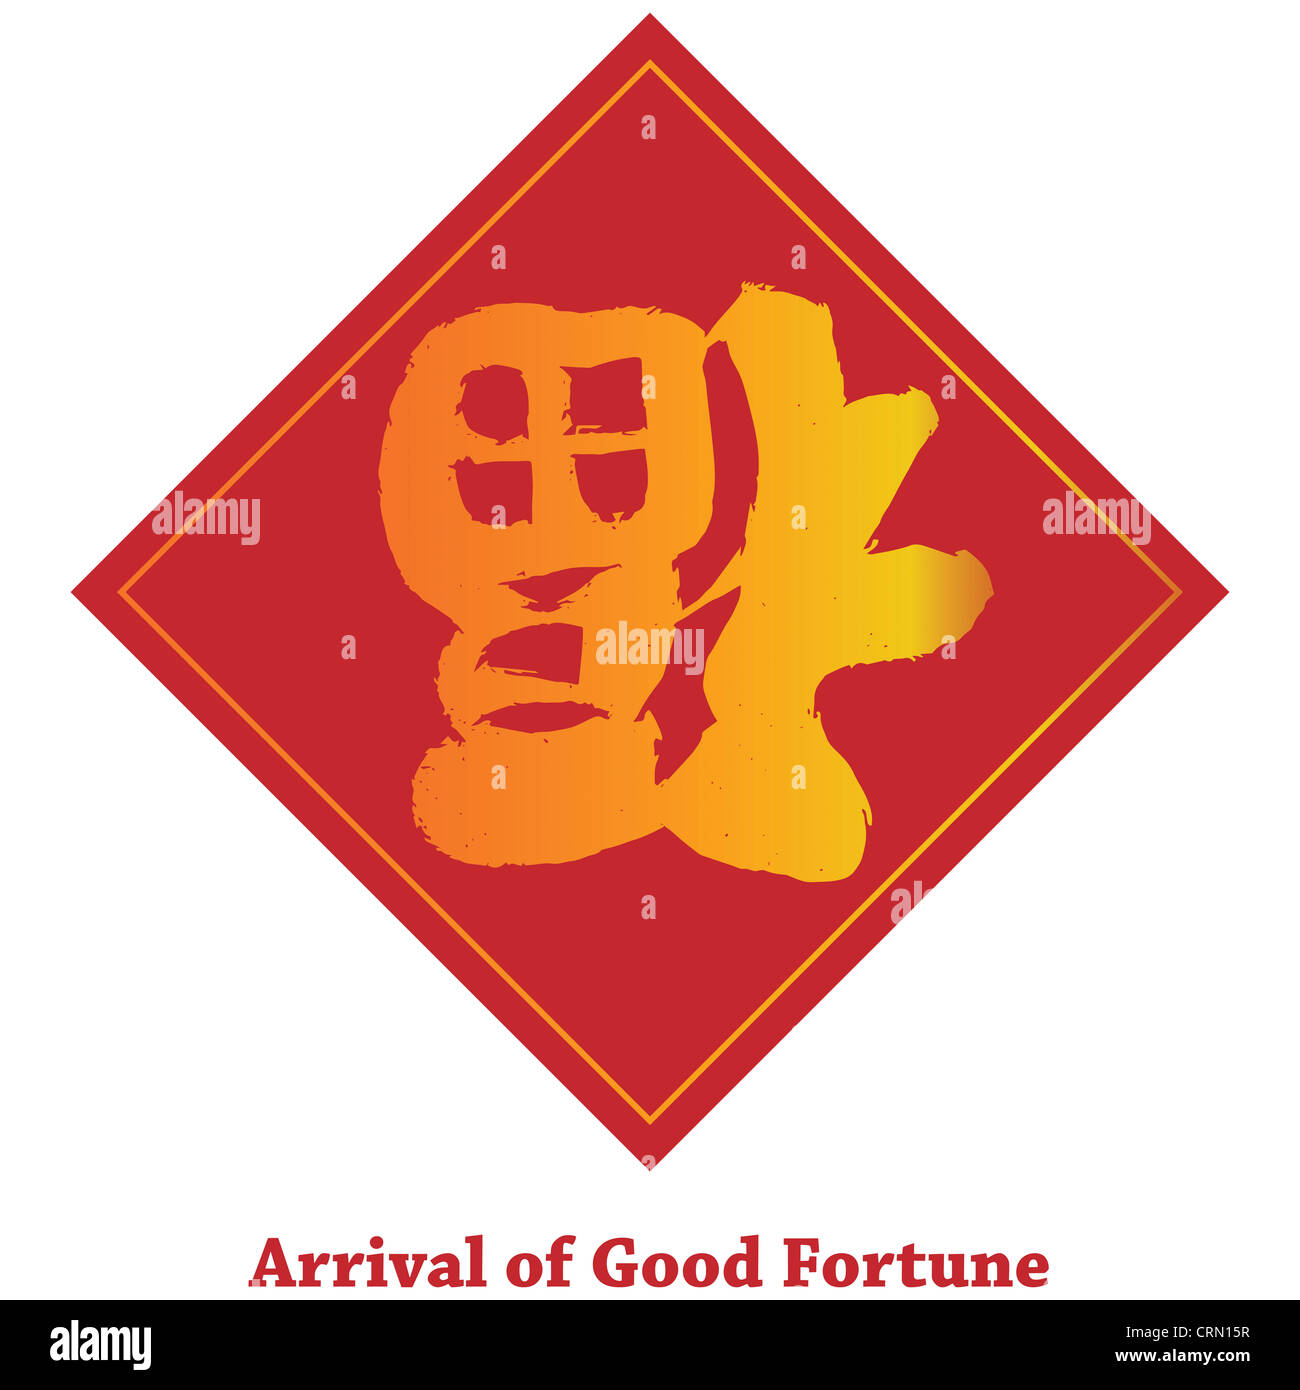 Upside Down Good Luck Chinese Word Symbolizing Arrival of Good Fortune Illustration Stock Photo